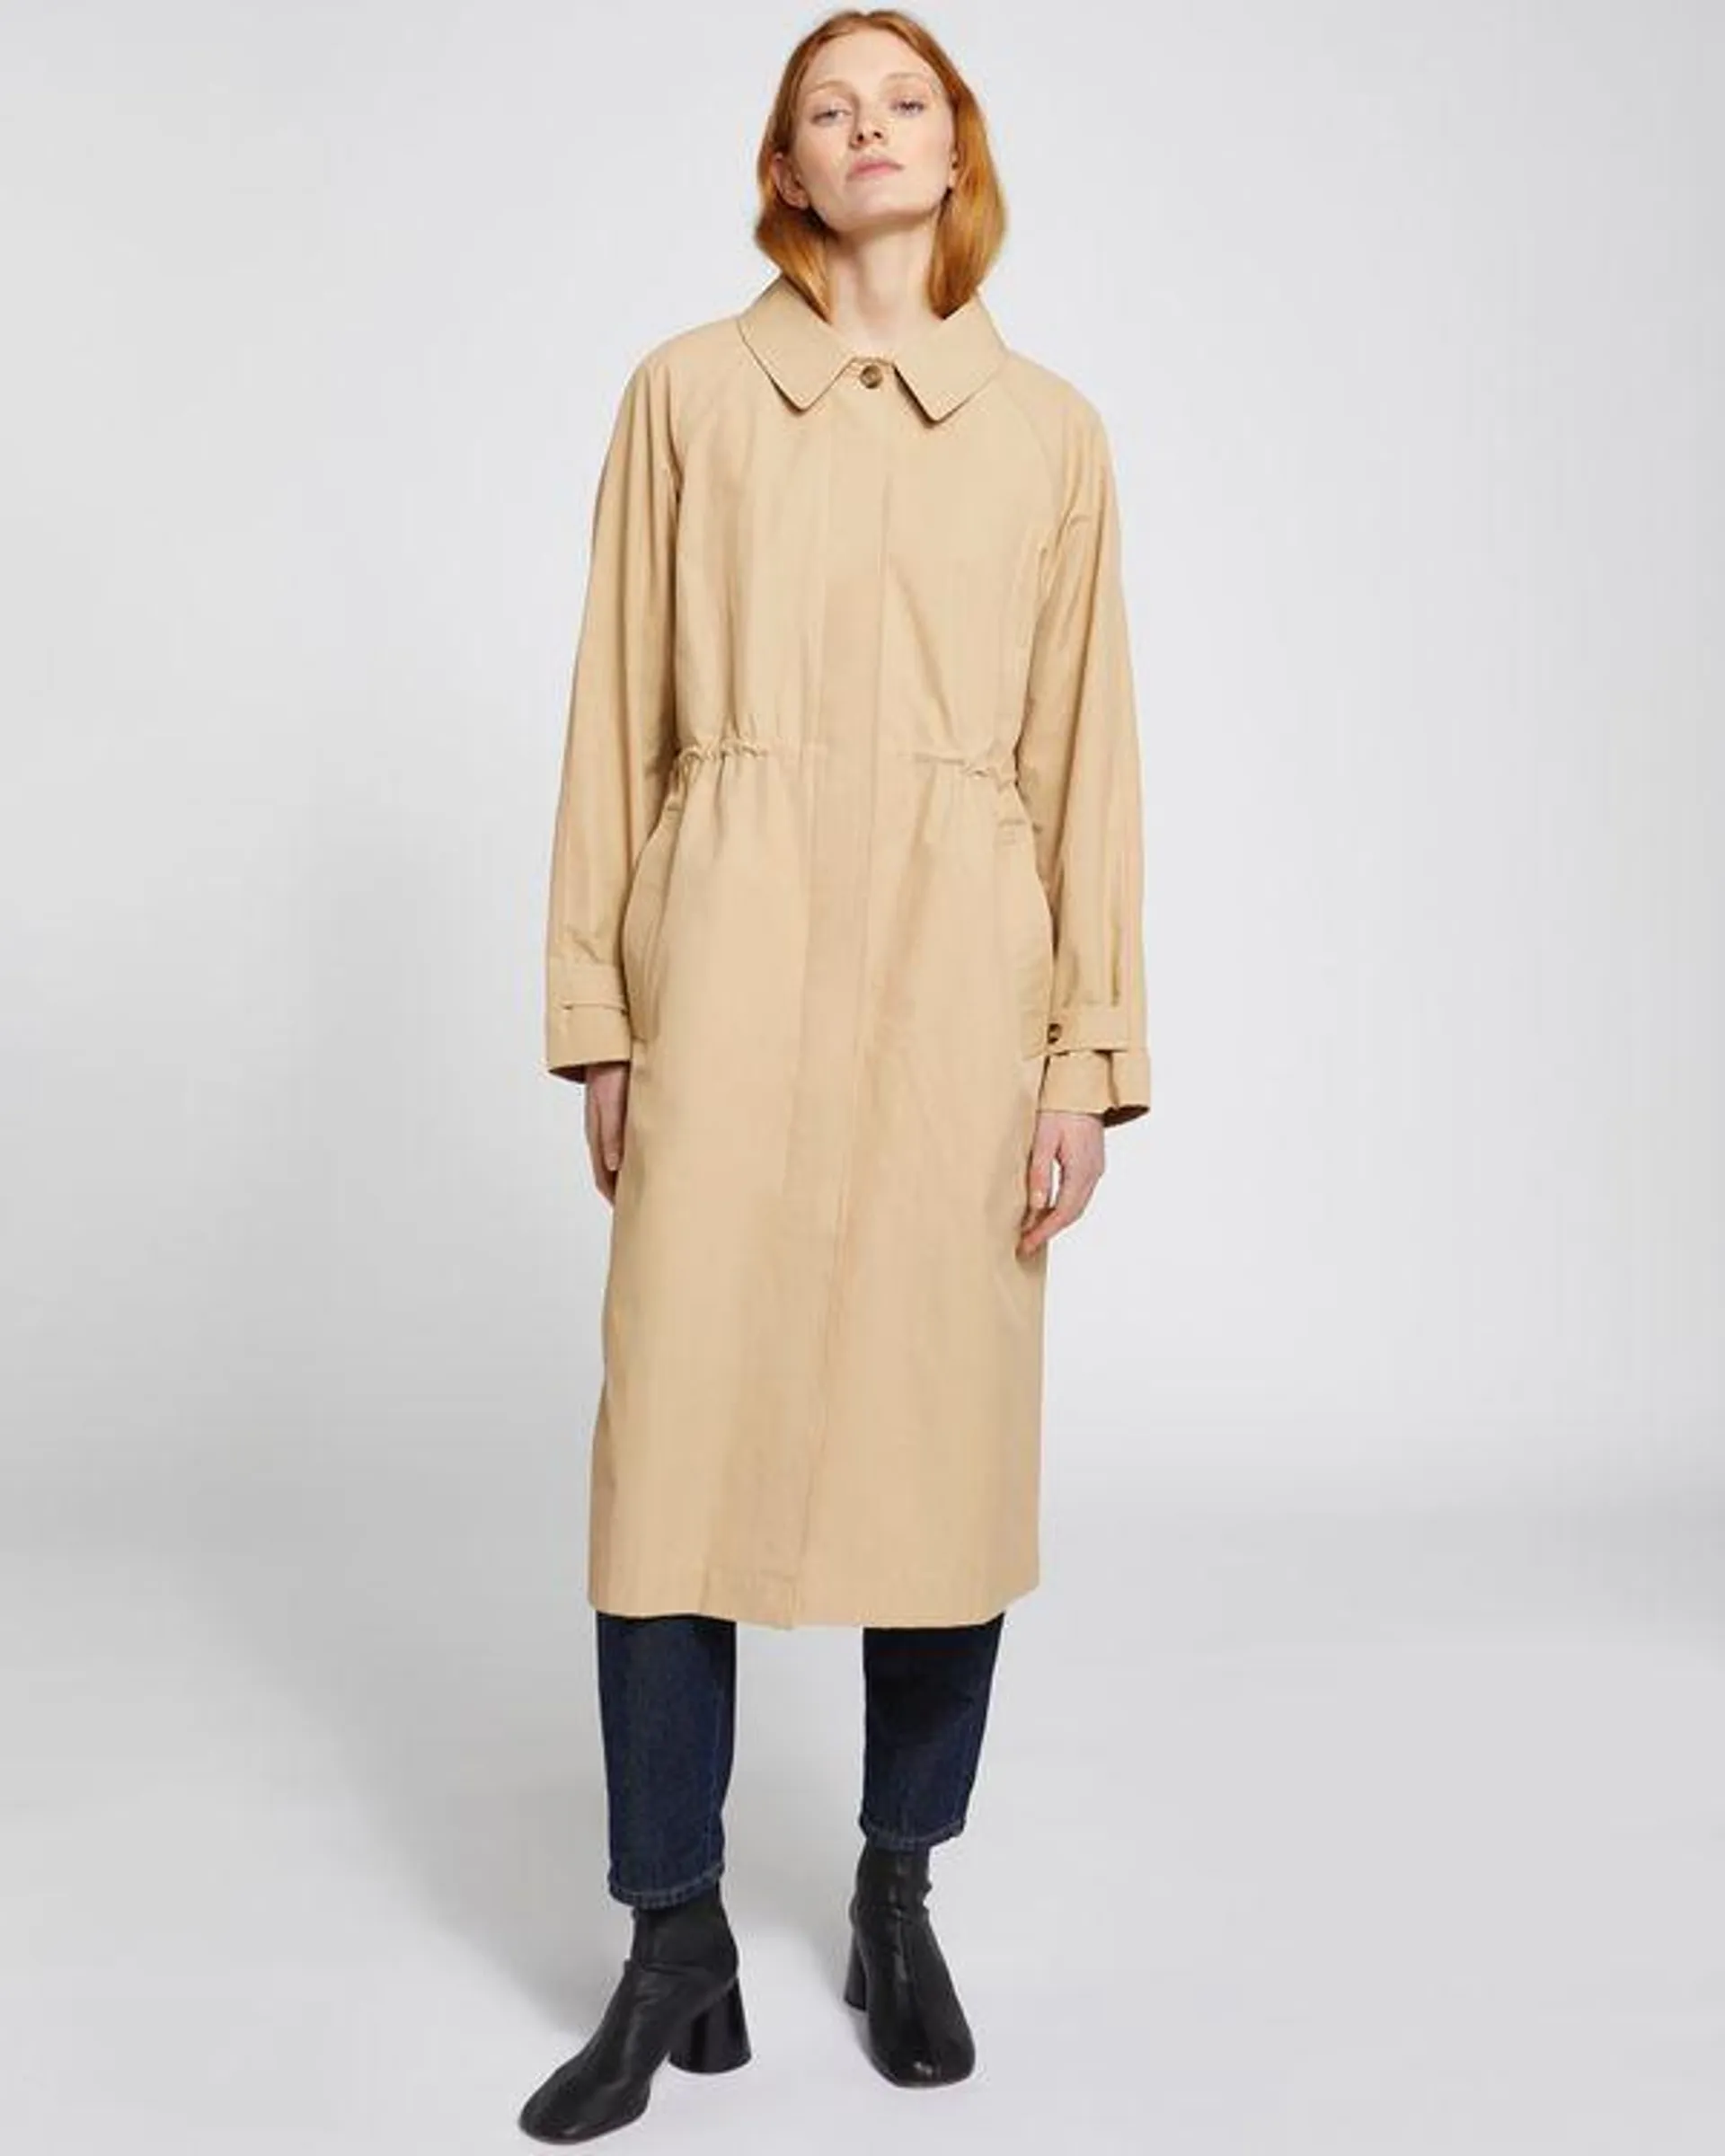 Carolyn Donnelly The Edit Cotton Blend Trench Coat